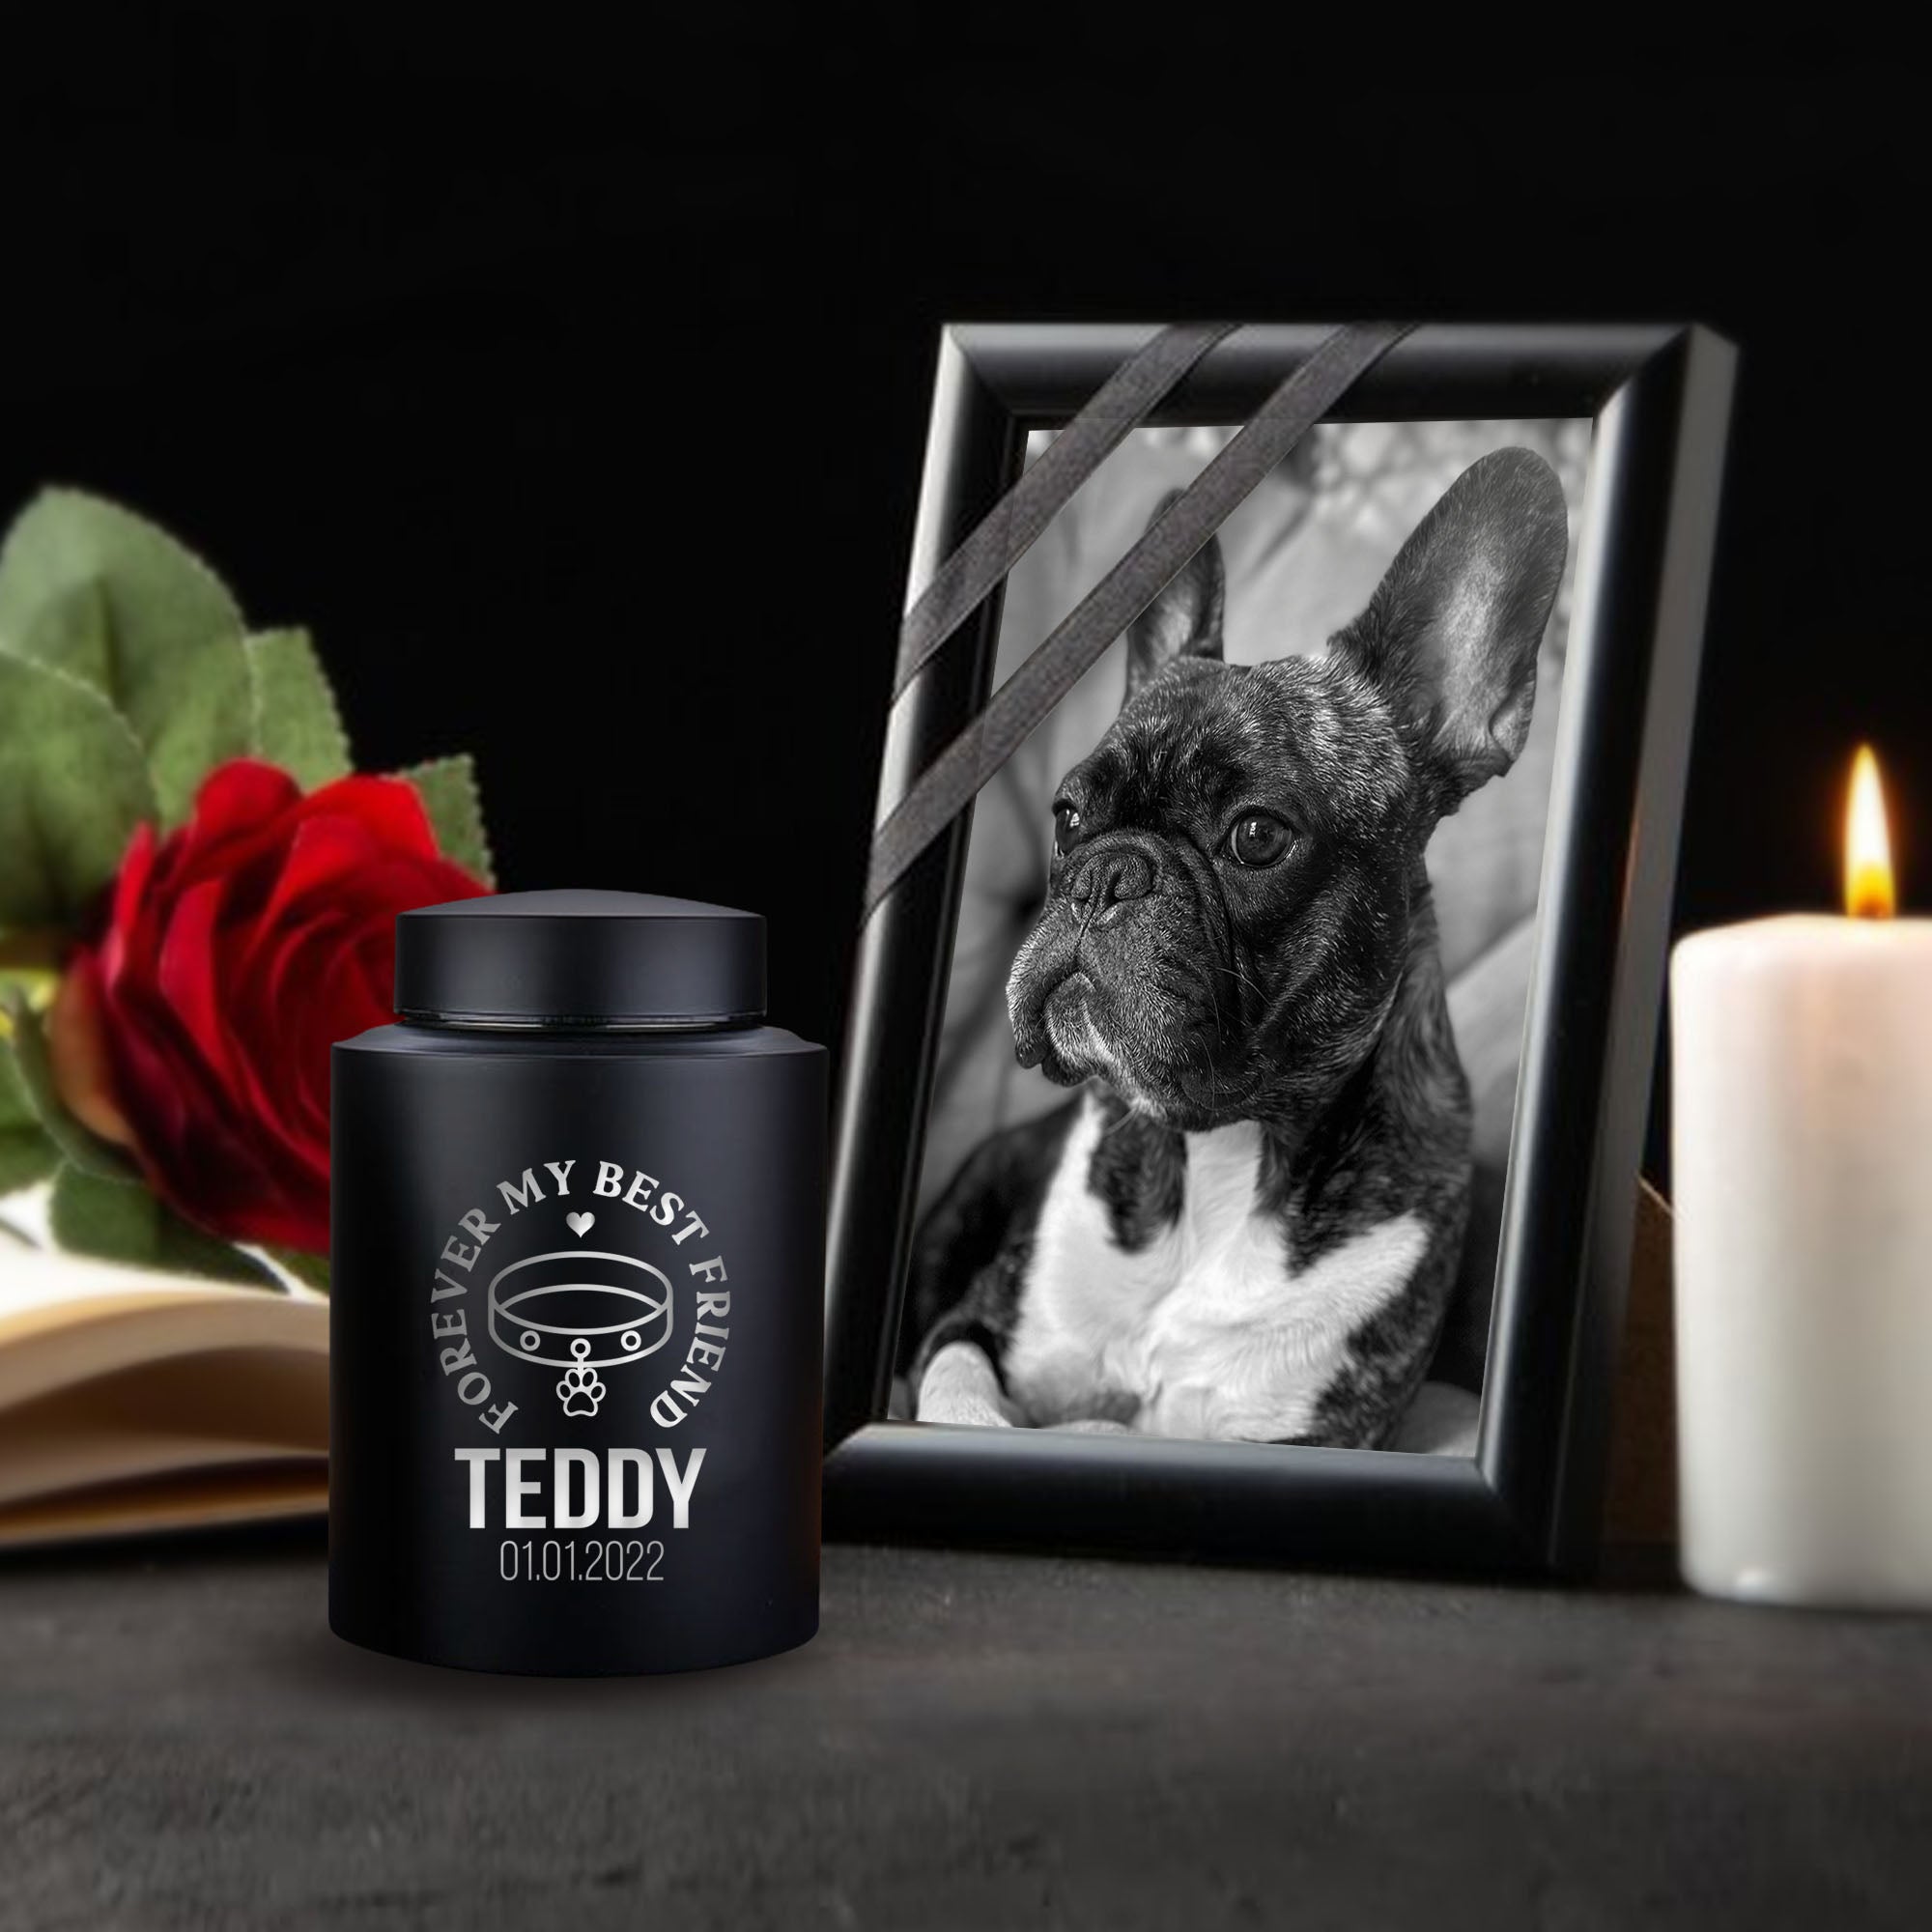 Personalized Custom Pet Dog Cremation Urn Engraved with Name, Date and Text - Round Powder Coated Steel Standard Size Urns for Dogs Ashes, Pet Size 30-50lbs